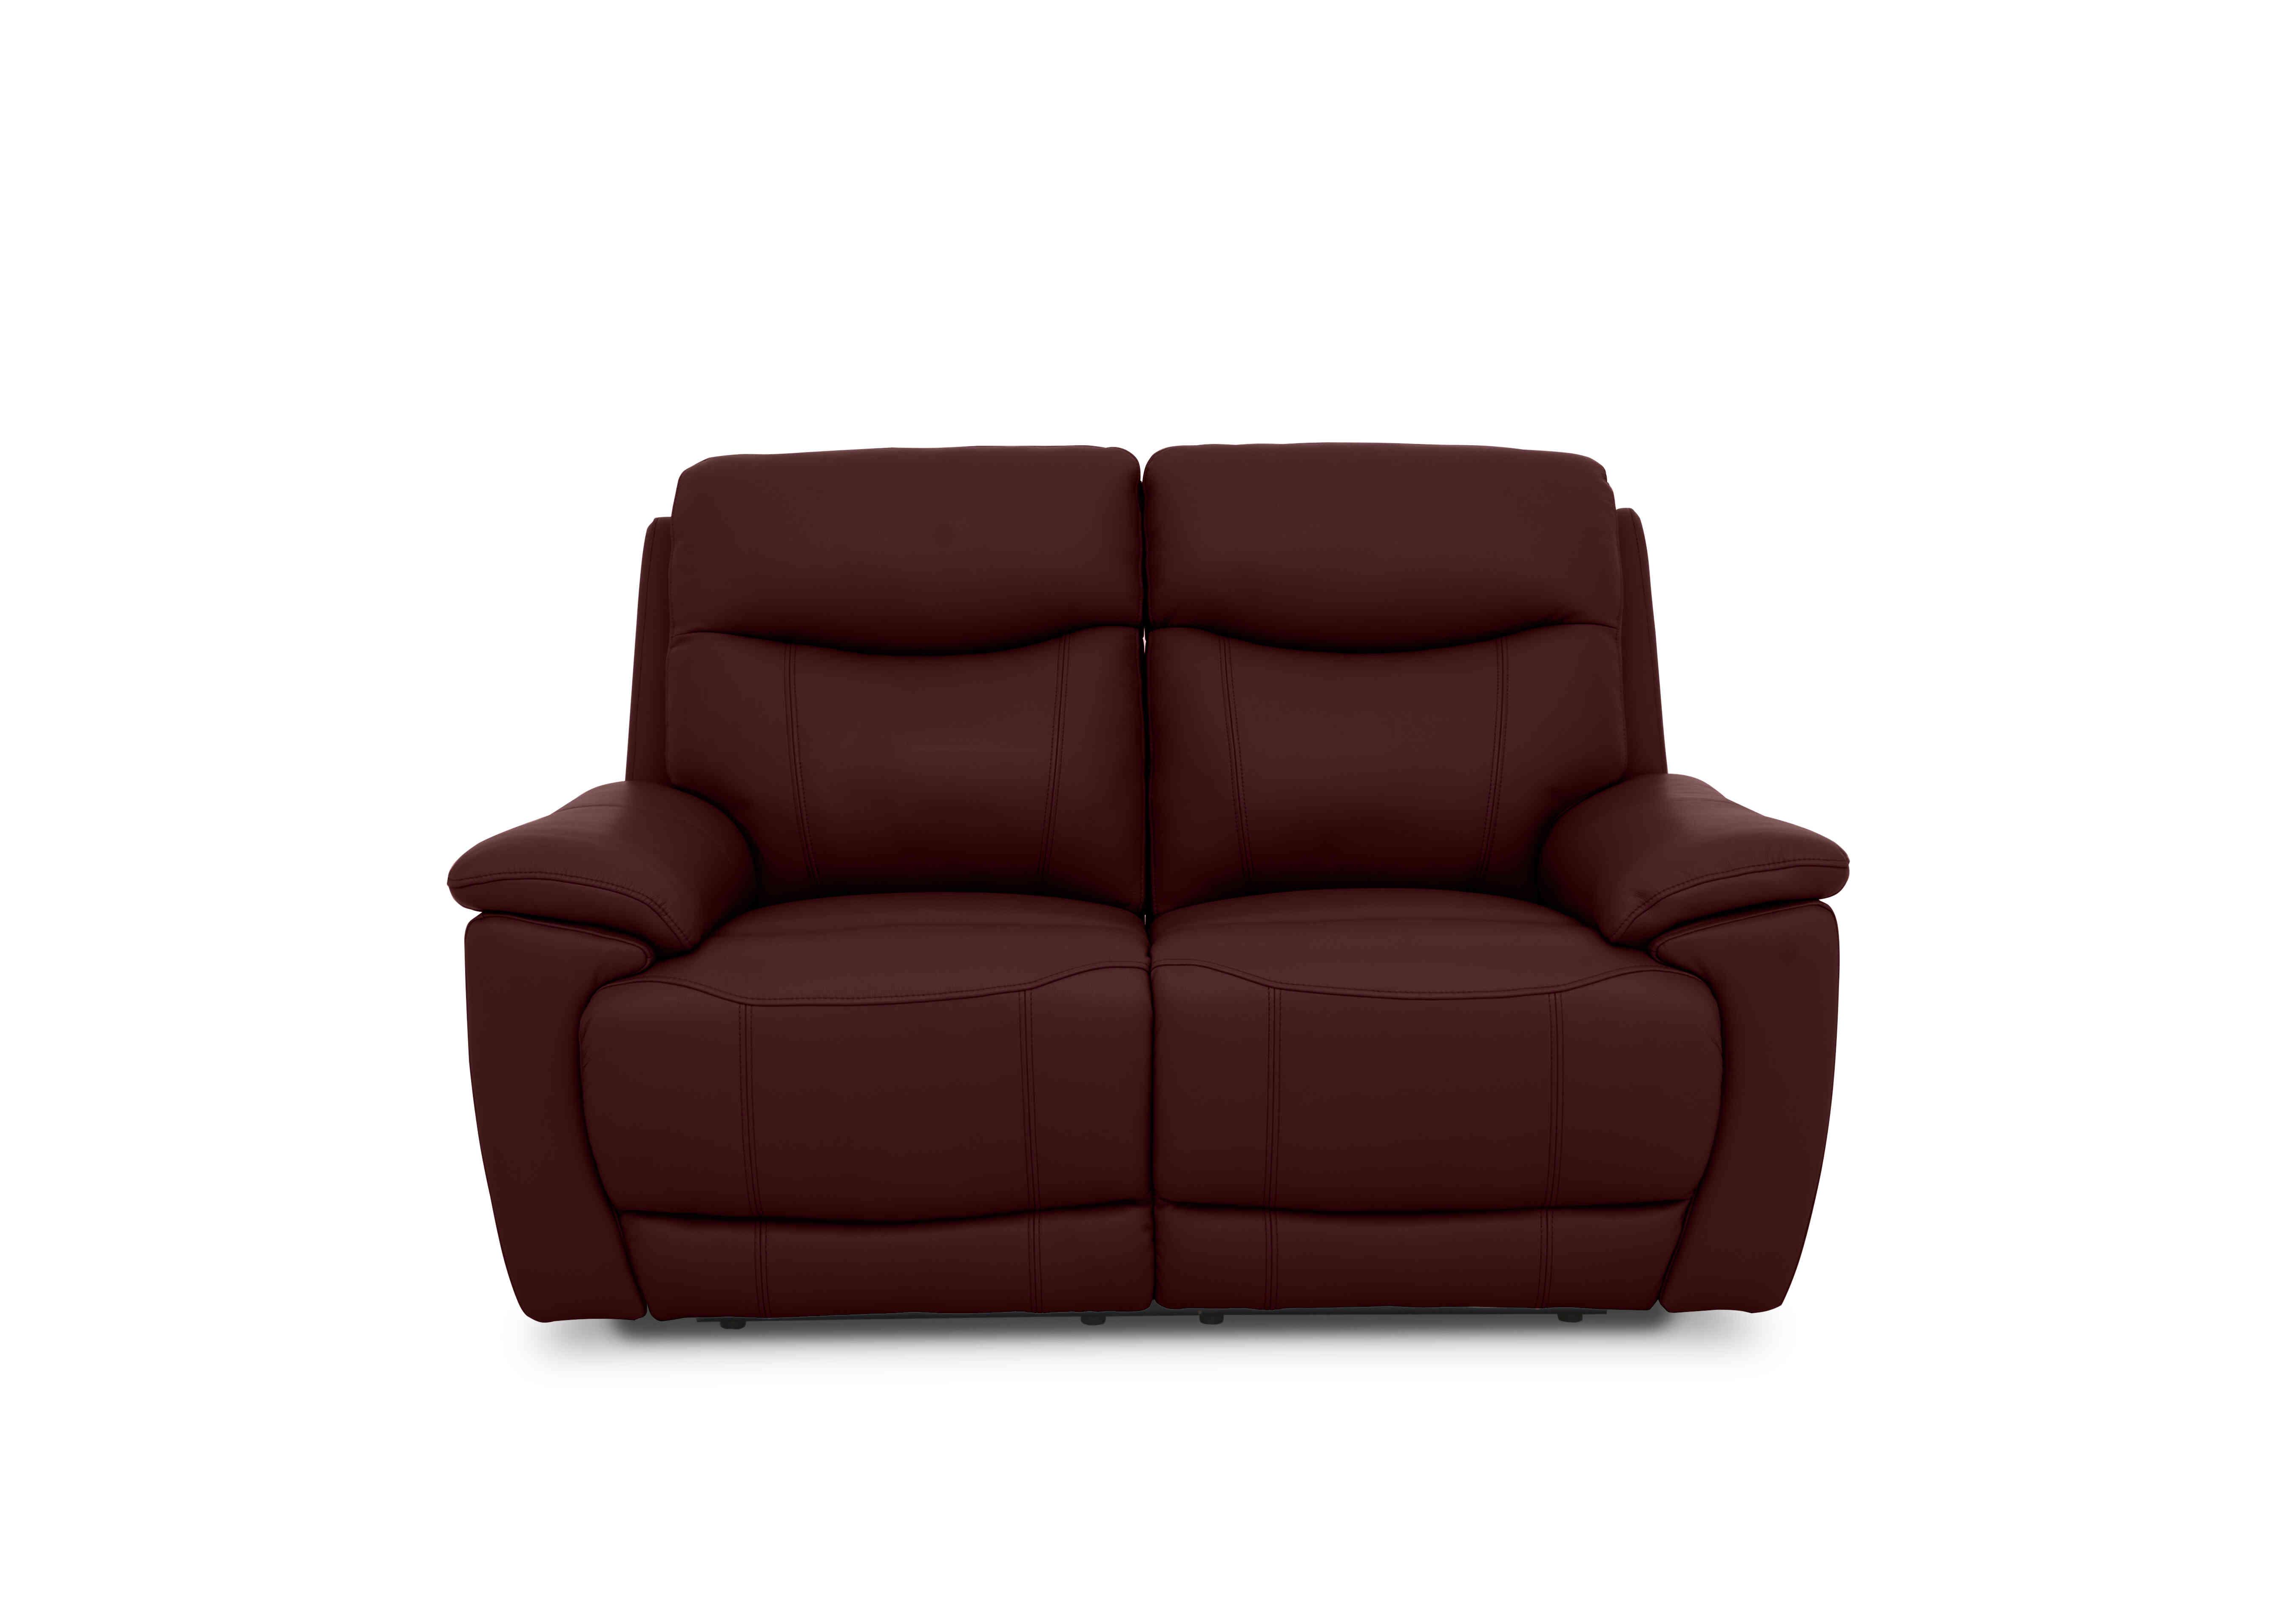 Sloane 2 Seater Leather Sofa in Cat-60/15 Ruby on Furniture Village